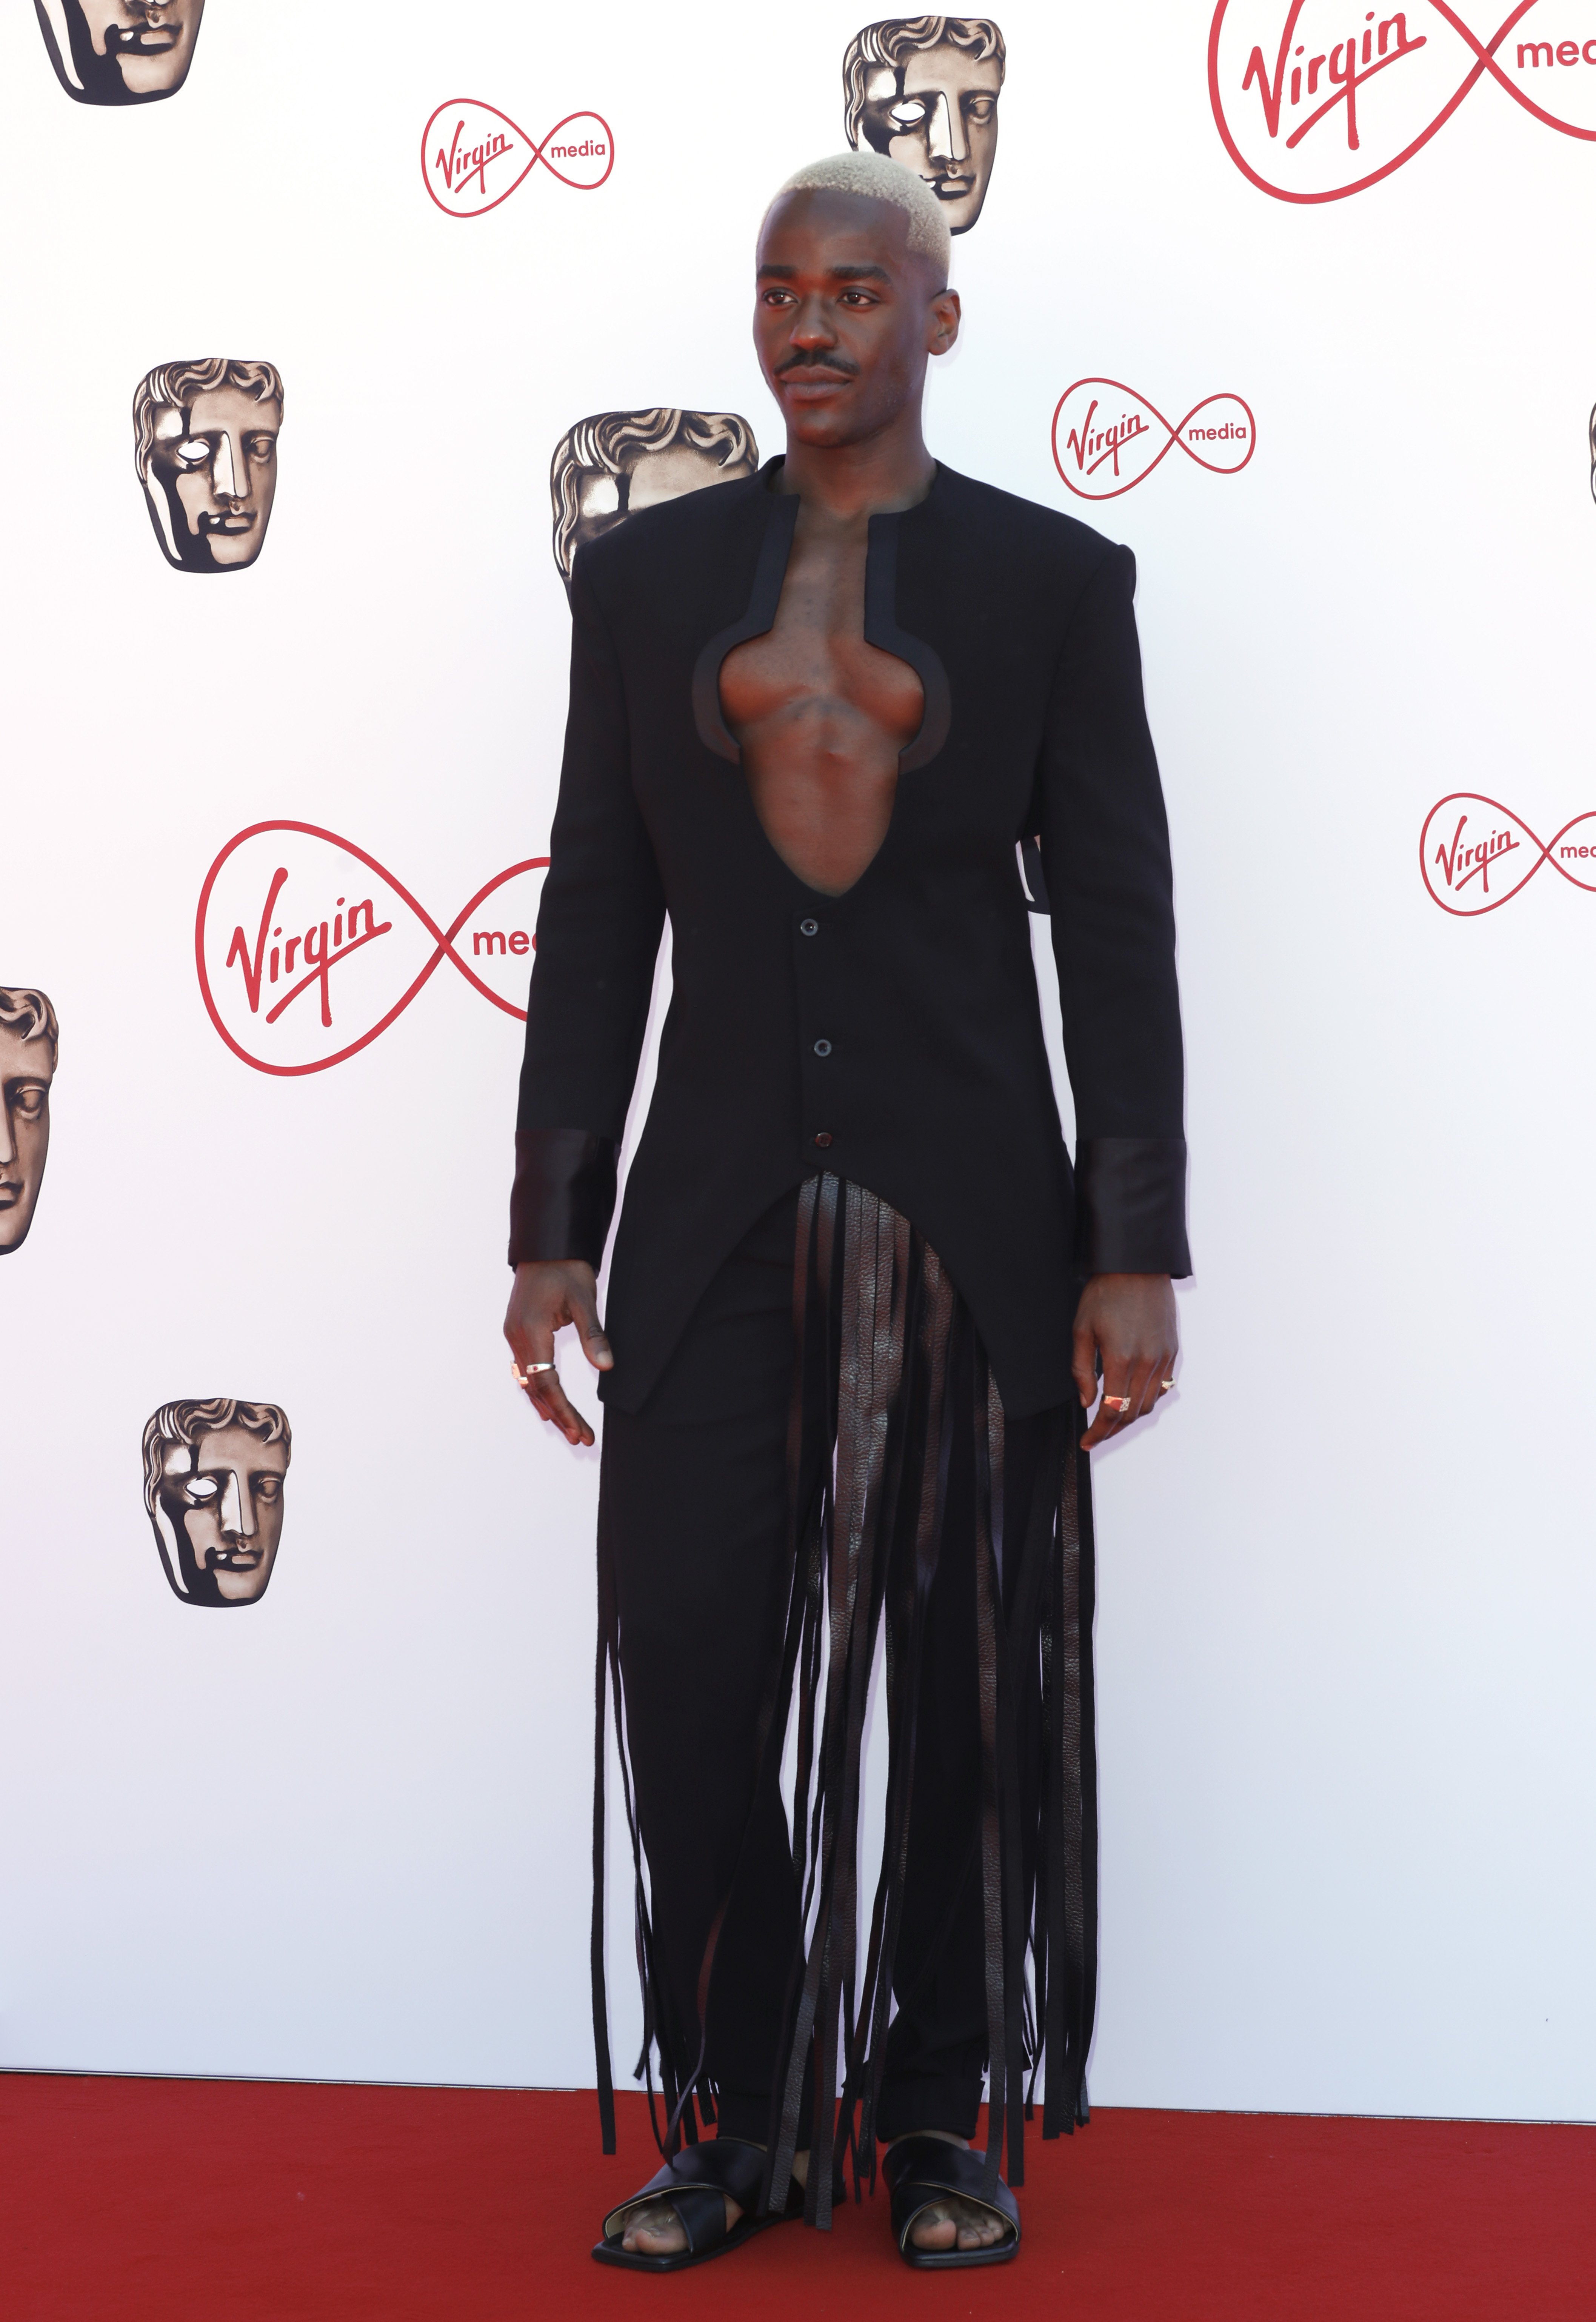 Ncuti Gatwa at the Virgin Media British Academy Television Awards at The Royal Festival Hall on May 08, 2022 in London, England. | Source: Getty Images